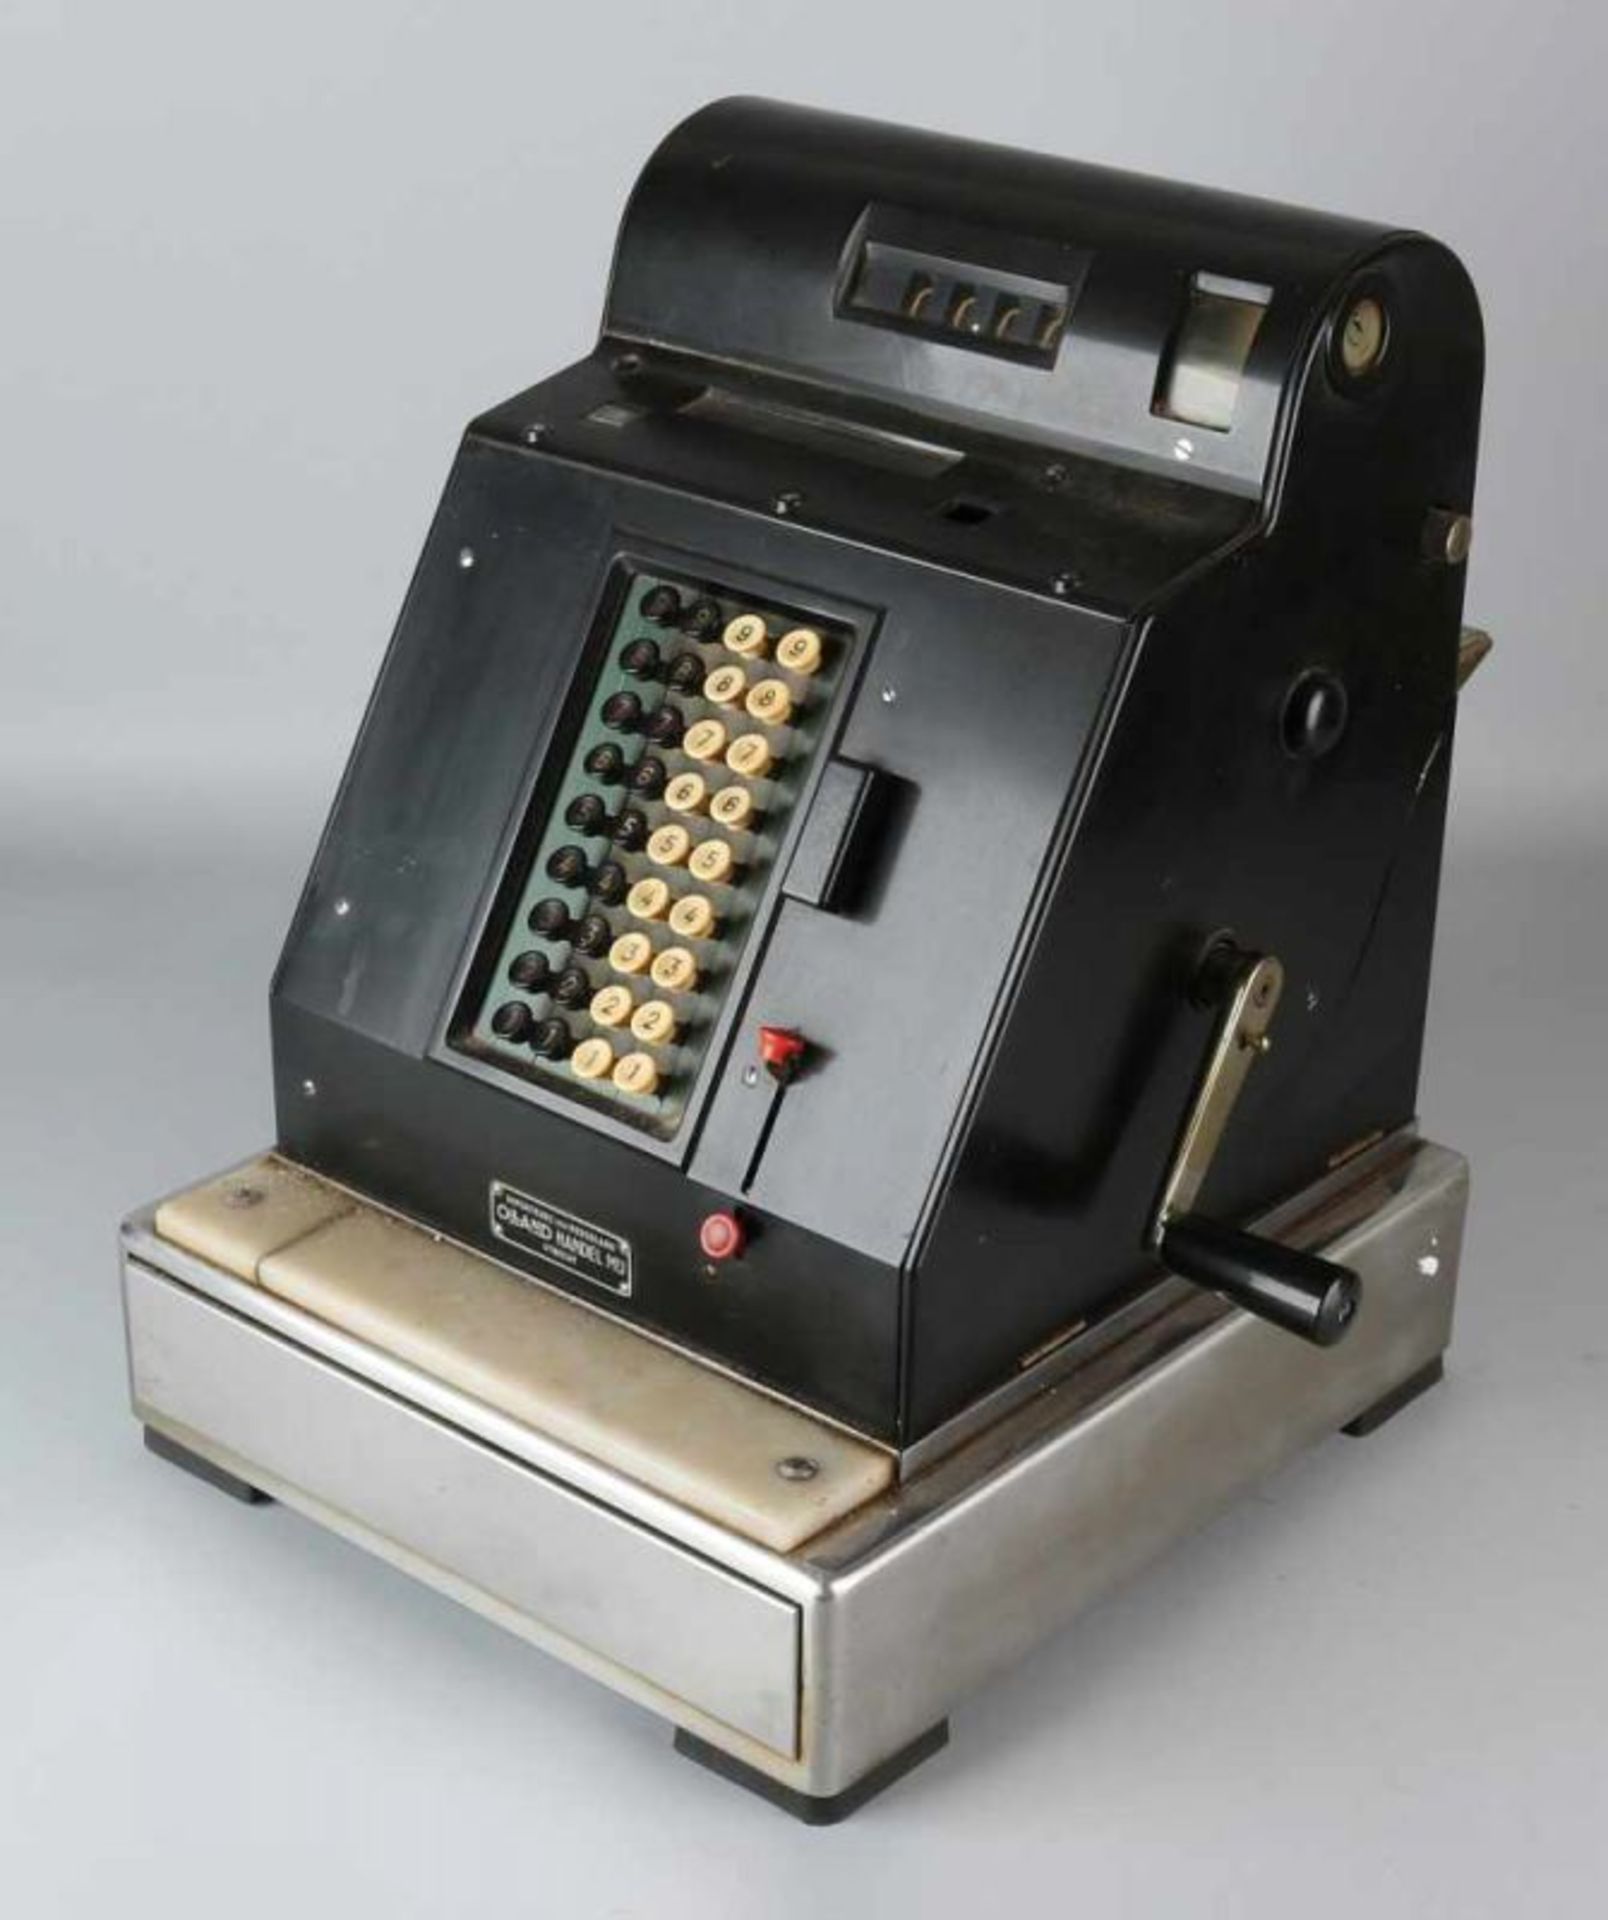 50s Cash register of bakelite, marble and chrome metal. Marked Olland Utrecht. Dimensions: 43 x 30 x